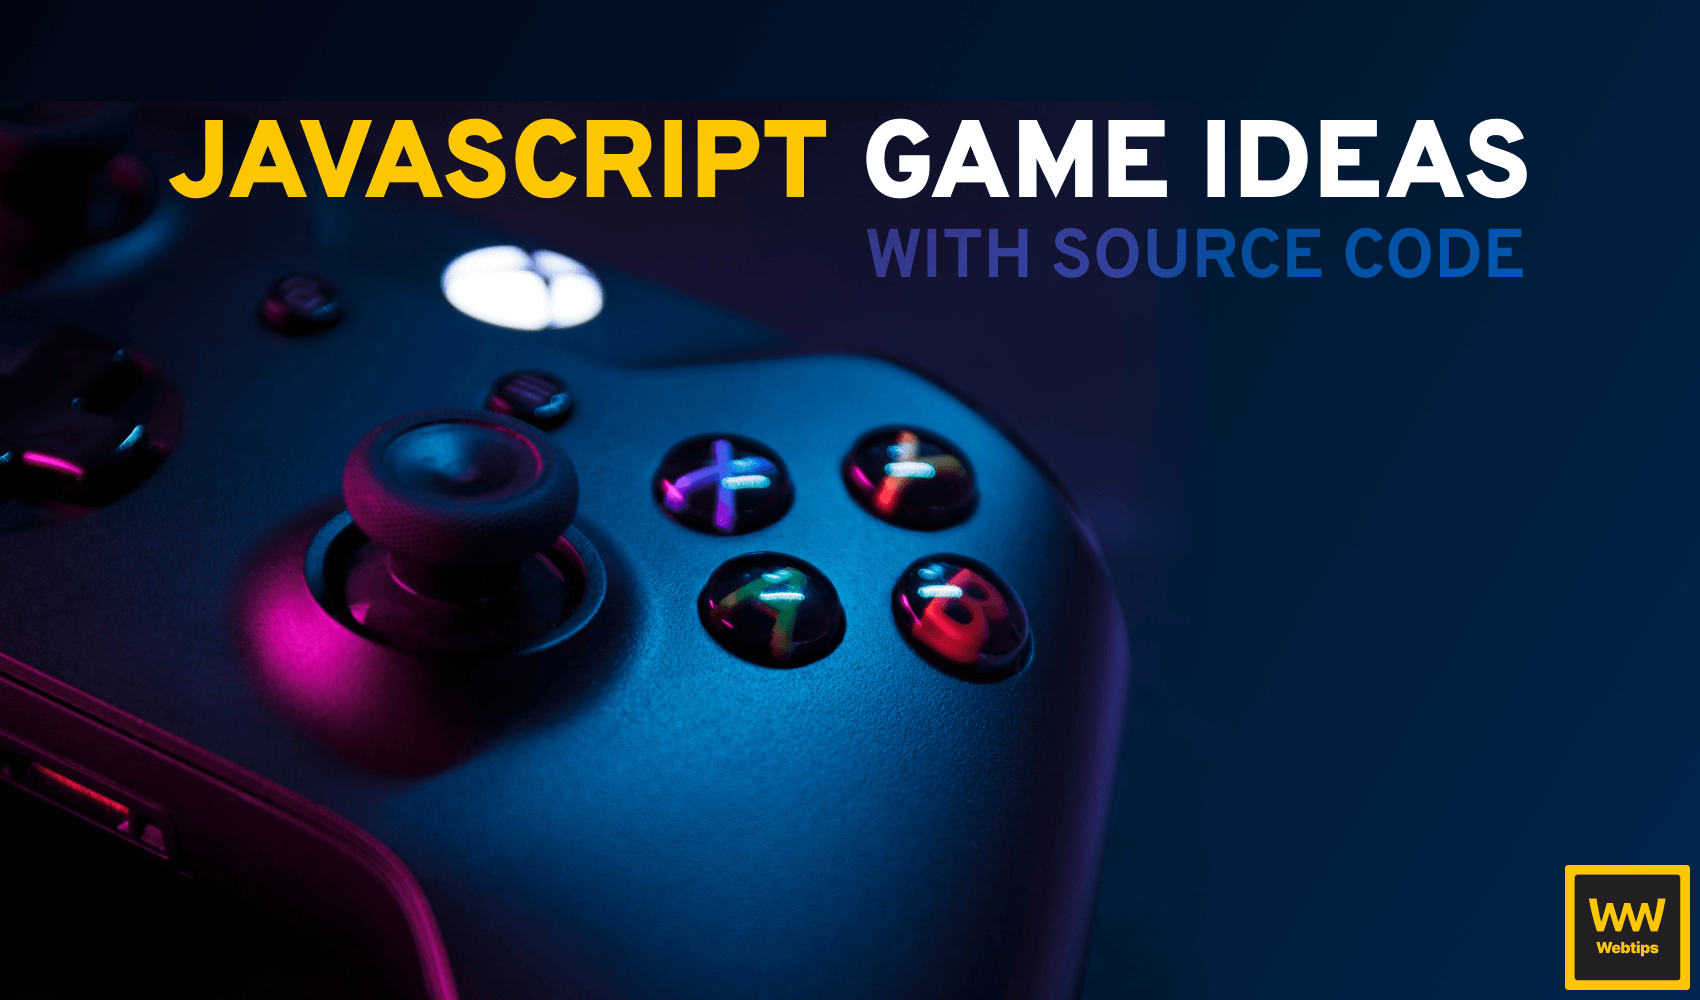 12 JavaScript Game Ideas with Source Code